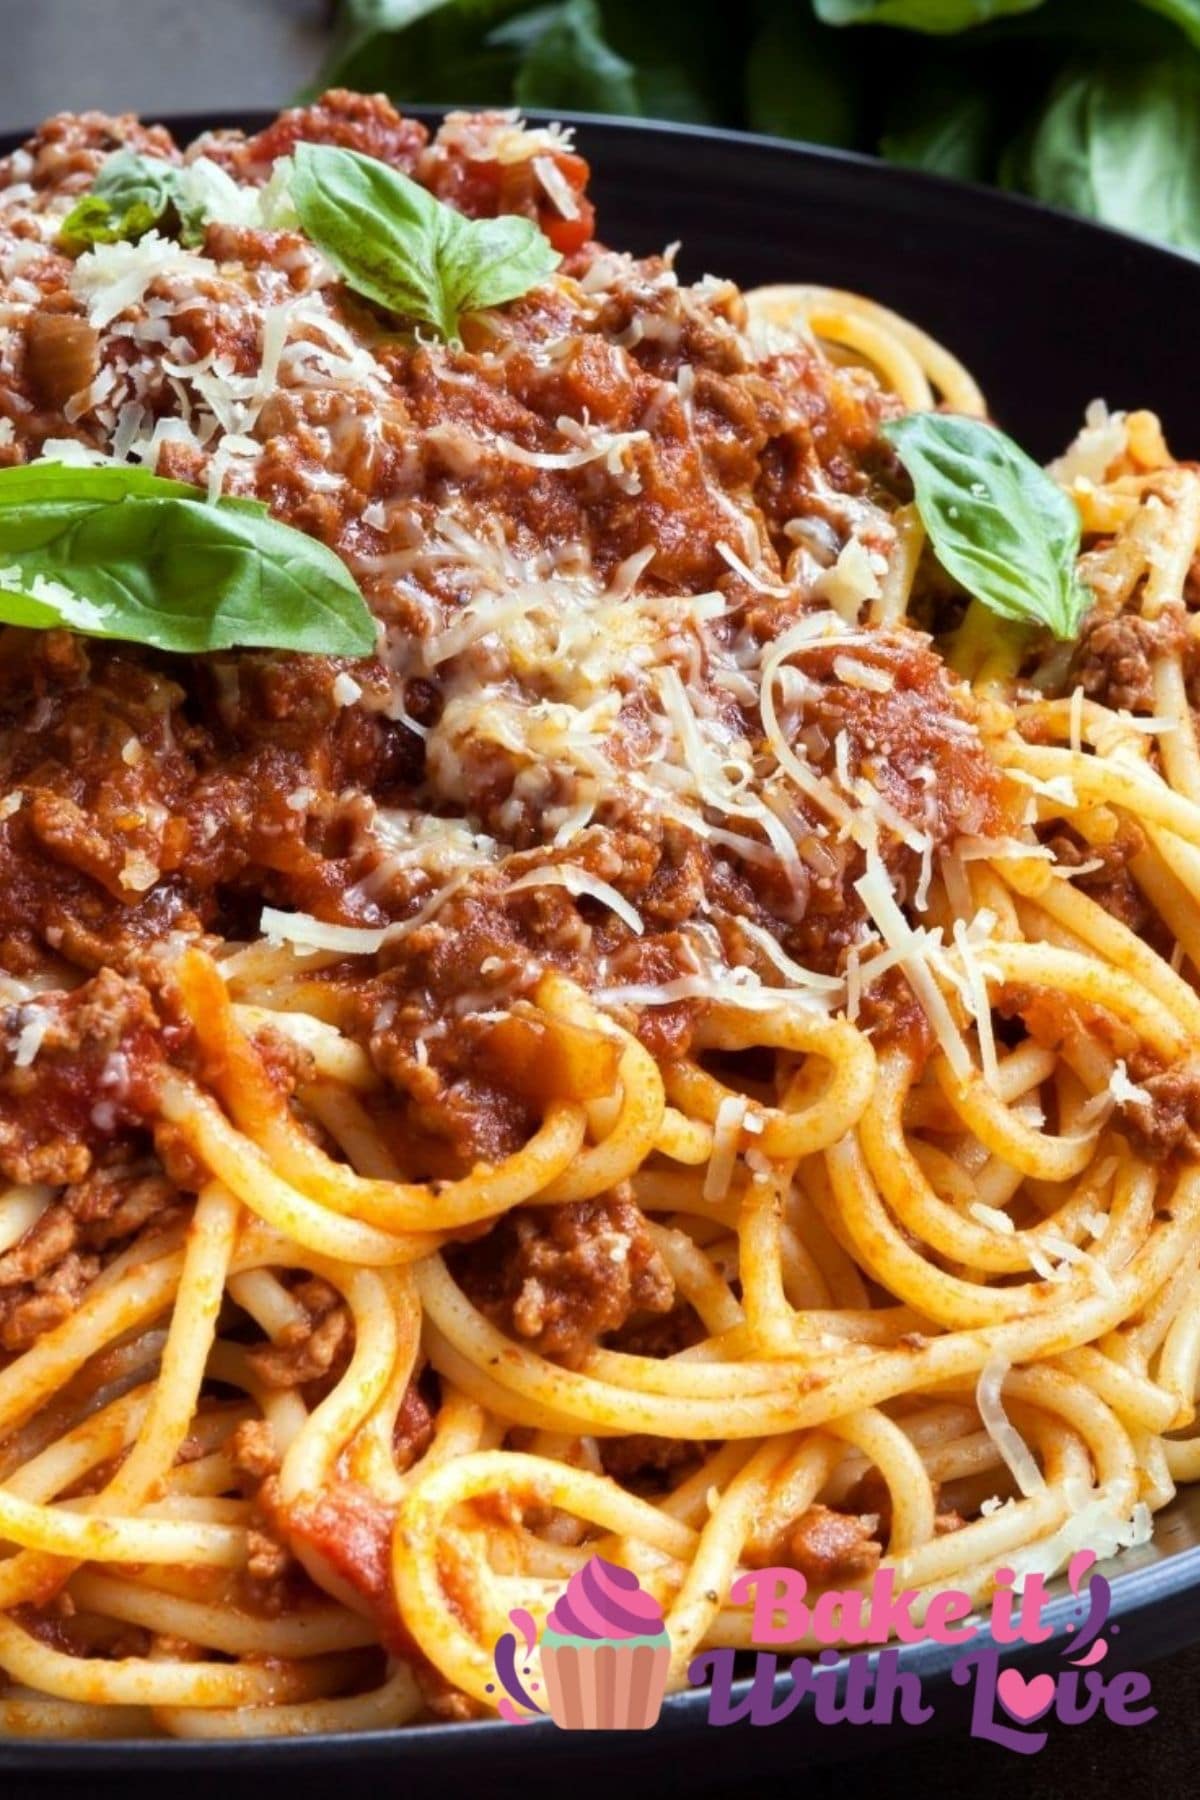 Tall closeup on the plated spaghetti bolognese topped with freshly grated Parmesan and basil leaves.